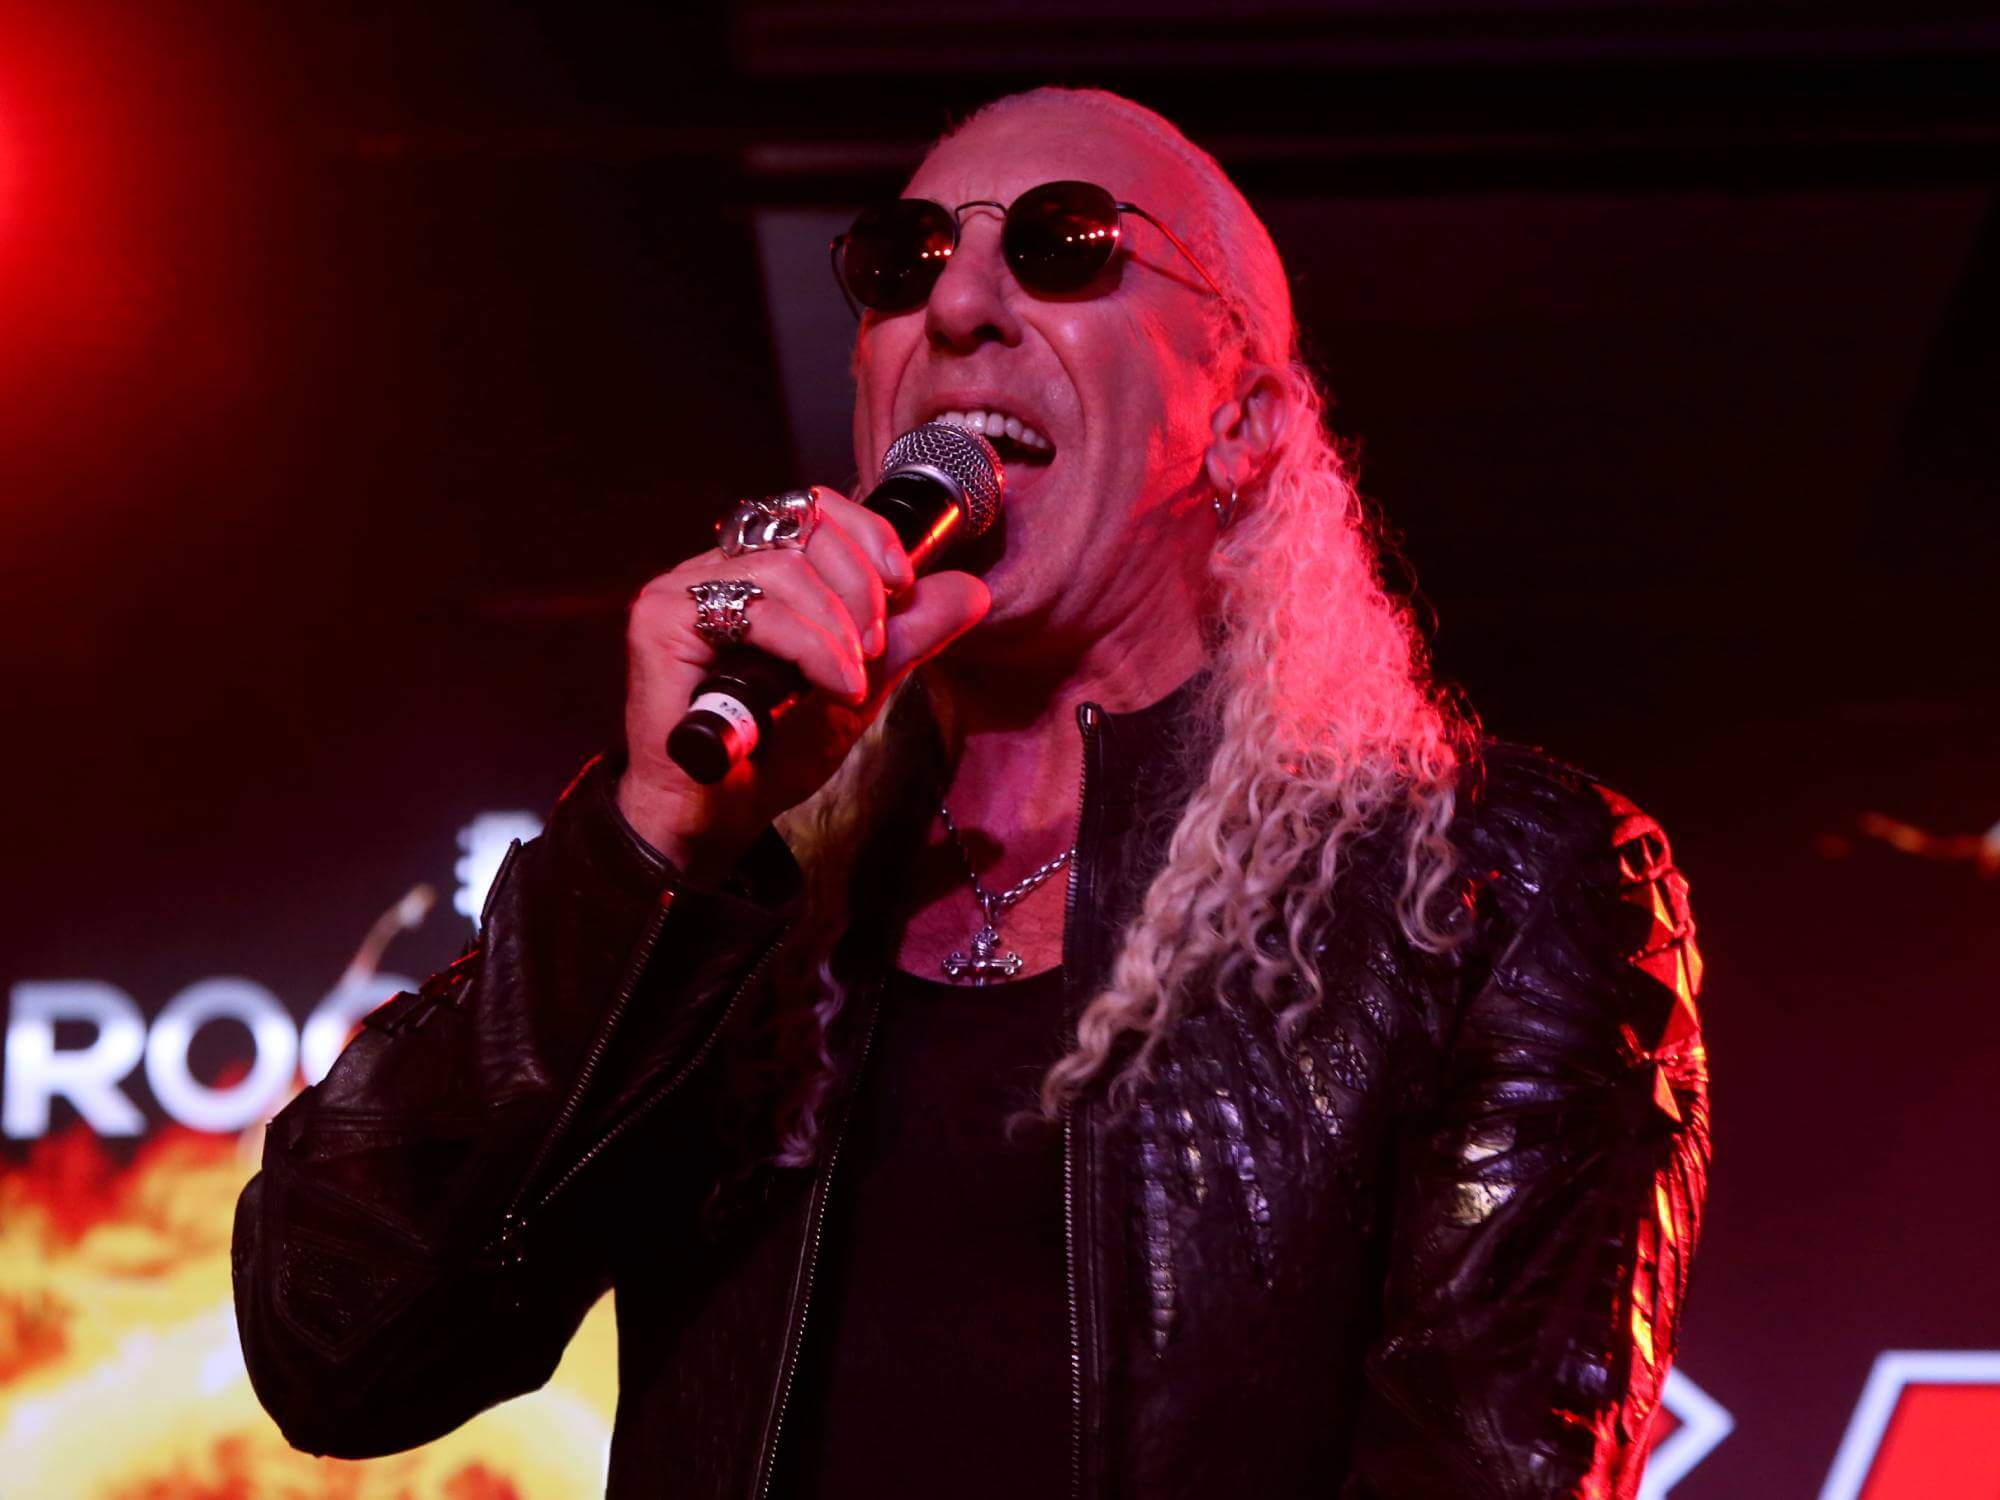 Dee Snider says he wrote Twisted Sister's 'Stay Hungry' in 45 minutes